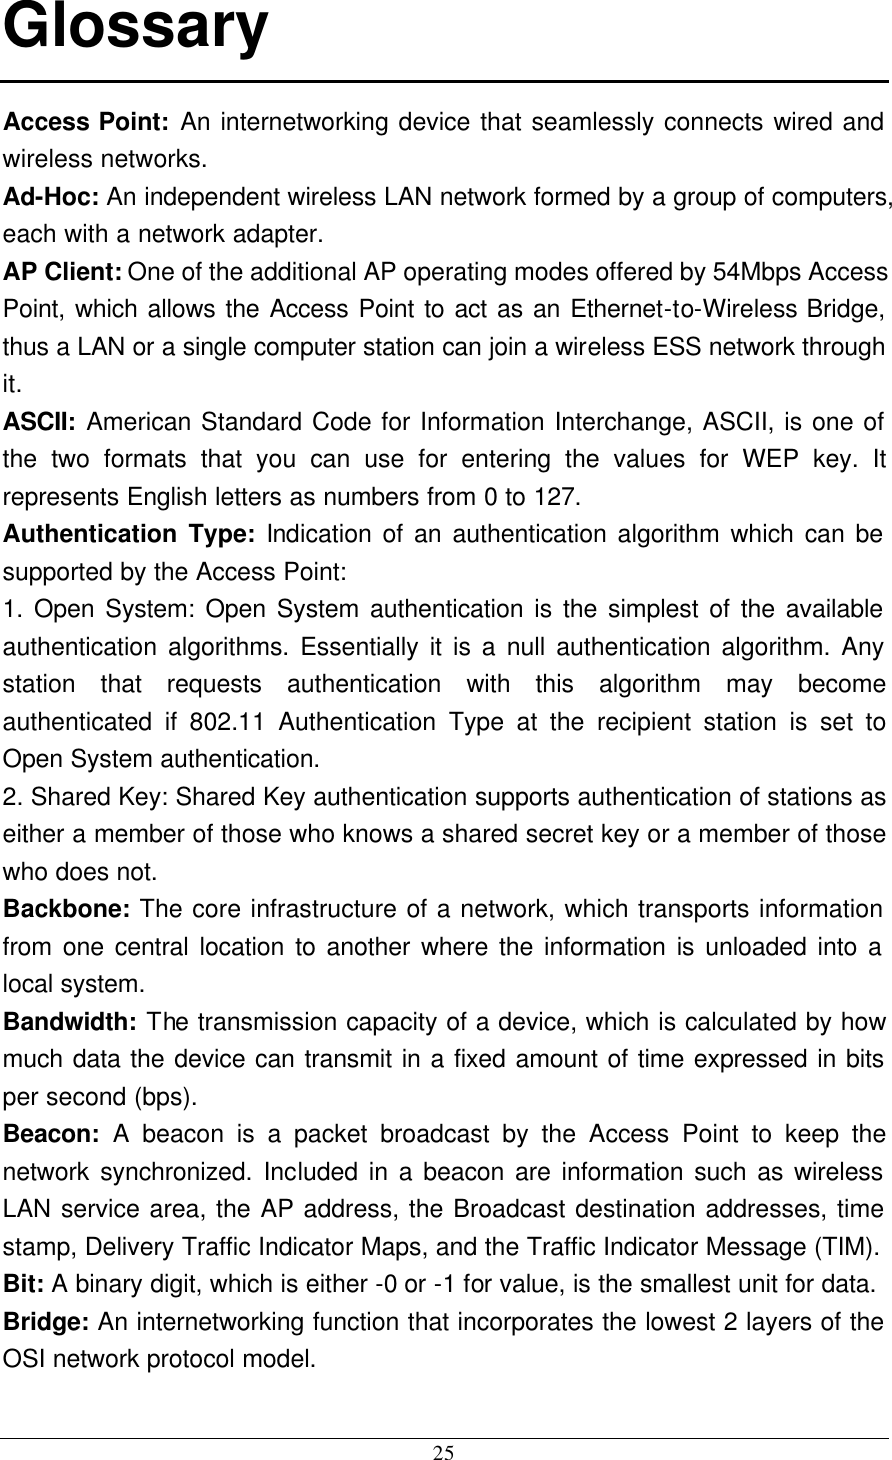 25 Glossary Access Point: An internetworking device that seamlessly connects wired and wireless networks. Ad-Hoc: An independent wireless LAN network formed by a group of computers, each with a network adapter. AP Client: One of the additional AP operating modes offered by 54Mbps Access Point, which allows the Access Point to act as an Ethernet-to-Wireless Bridge, thus a LAN or a single computer station can join a wireless ESS network through it. ASCII: American Standard Code for Information Interchange, ASCII, is one of the two formats that you can use for entering the values for WEP key. It represents English letters as numbers from 0 to 127. Authentication Type: Indication of an authentication algorithm which can be supported by the Access Point: 1. Open System: Open System authentication is the simplest of the available authentication algorithms. Essentially it is a null authentication algorithm. Any station that requests authentication with this algorithm may become authenticated if 802.11 Authentication Type at the recipient station is set to Open System authentication. 2. Shared Key: Shared Key authentication supports authentication of stations as either a member of those who knows a shared secret key or a member of those who does not. Backbone: The core infrastructure of a network, which transports information from one central location to another where the information is unloaded into a local system. Bandwidth: The transmission capacity of a device, which is calculated by how much data the device can transmit in a fixed amount of time expressed in bits per second (bps). Beacon: A beacon is a packet broadcast by the Access Point to keep the network synchronized. Included in a beacon are information such as wireless LAN service area, the AP address, the Broadcast destination addresses, time stamp, Delivery Traffic Indicator Maps, and the Traffic Indicator Message (TIM). Bit: A binary digit, which is either -0 or -1 for value, is the smallest unit for data. Bridge: An internetworking function that incorporates the lowest 2 layers of the OSI network protocol model.  